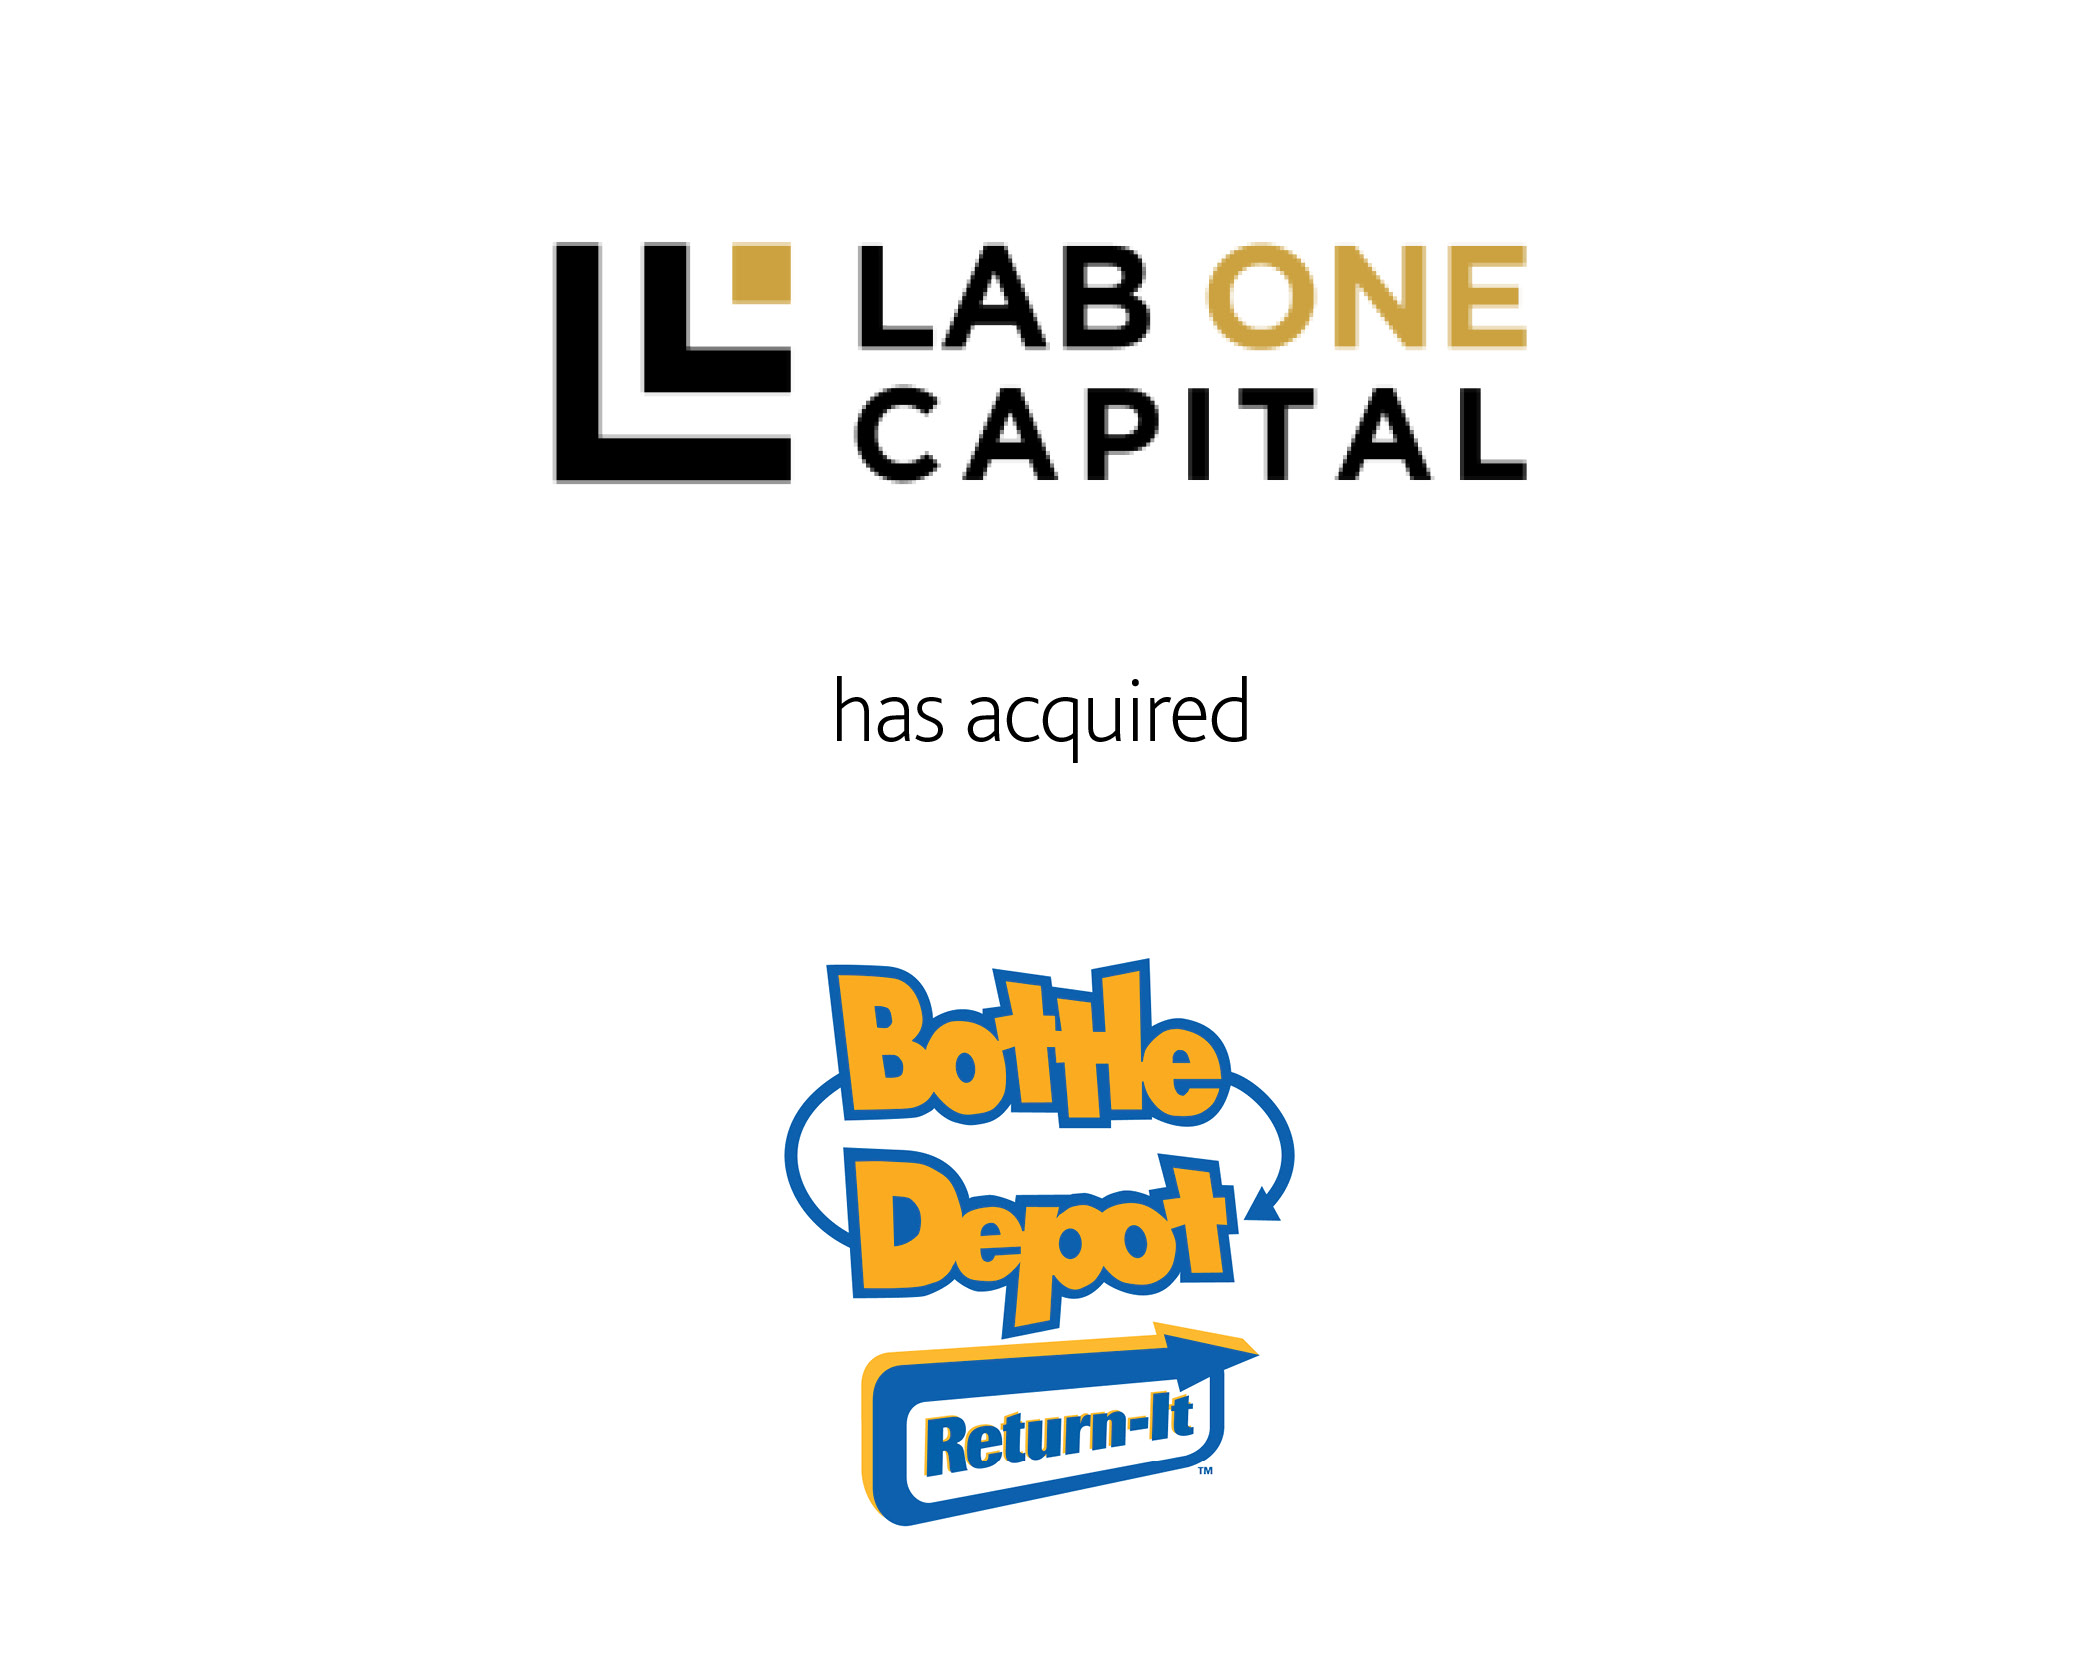 Lab One Capital has acquired Bottle Depot.